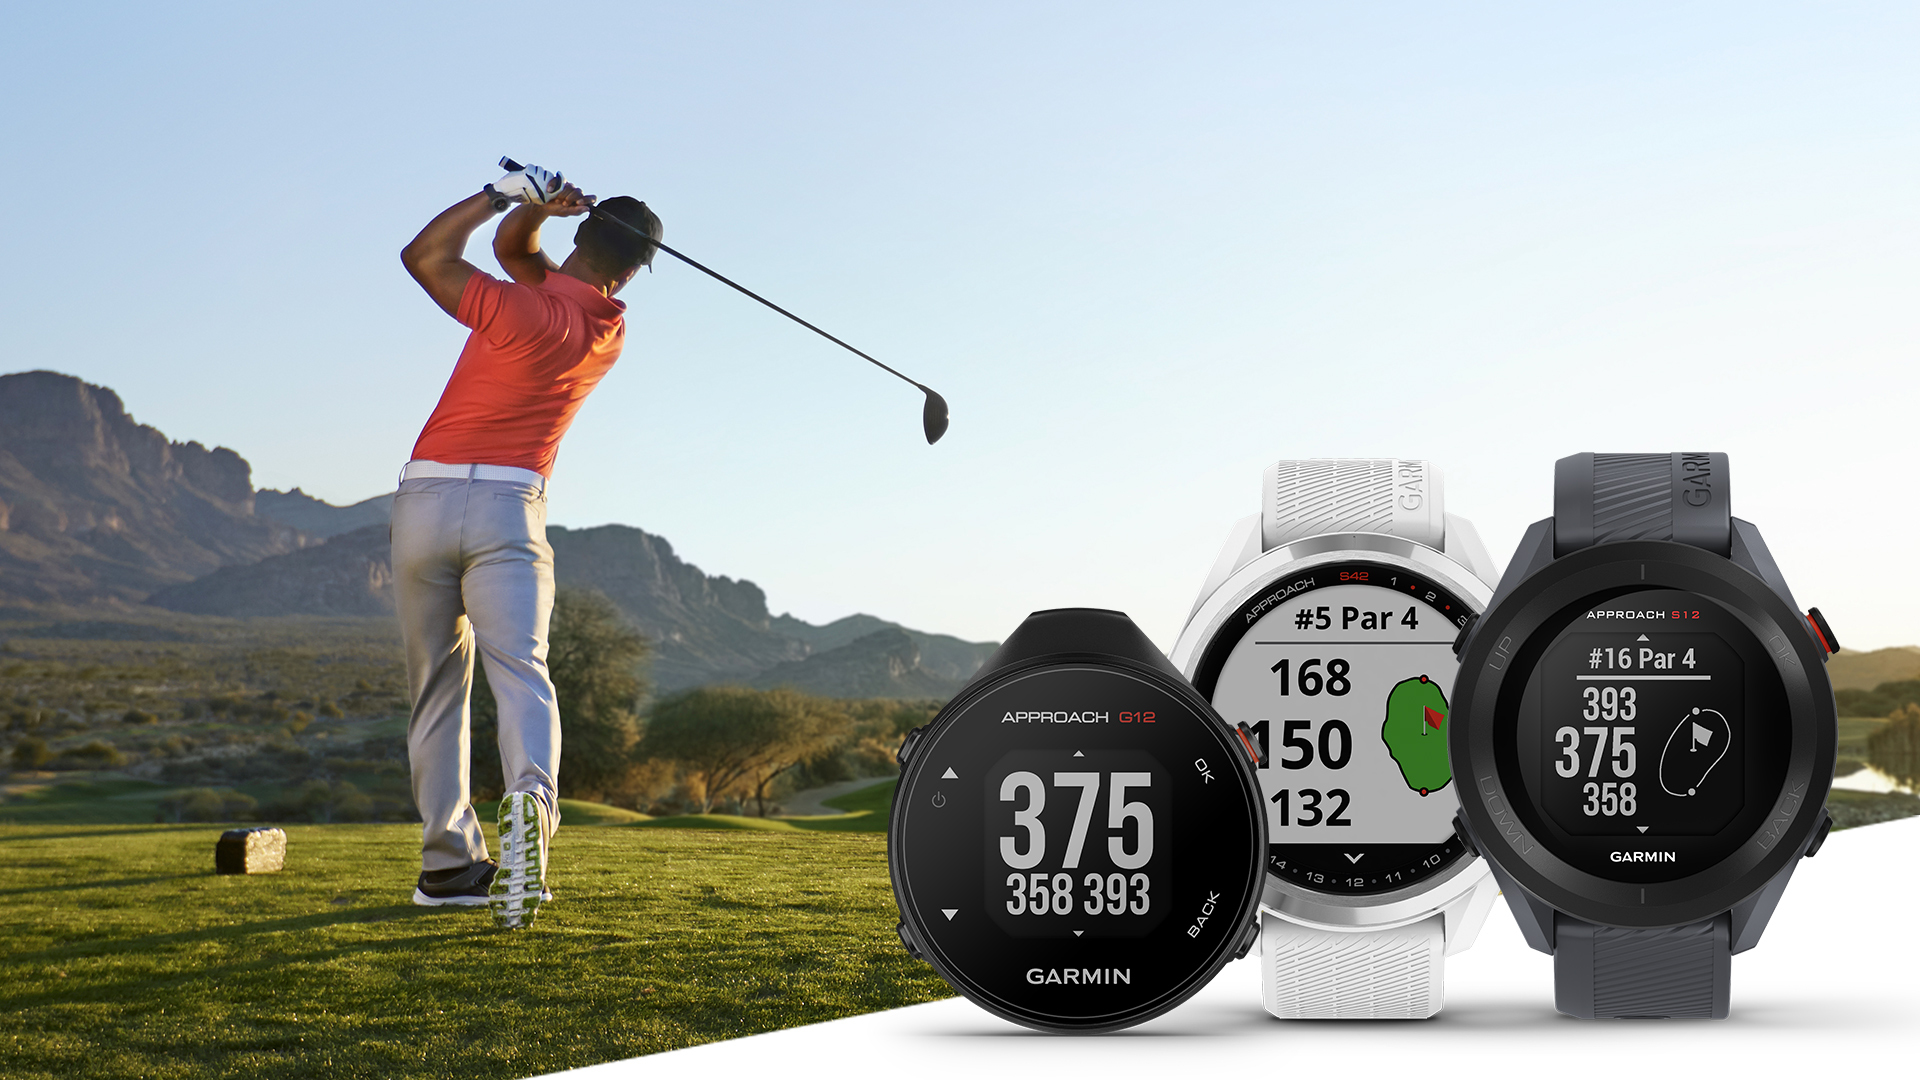 Garmin expands its Approach® with a new lineup of GPS devices to help golfers improve their game | Business Wire